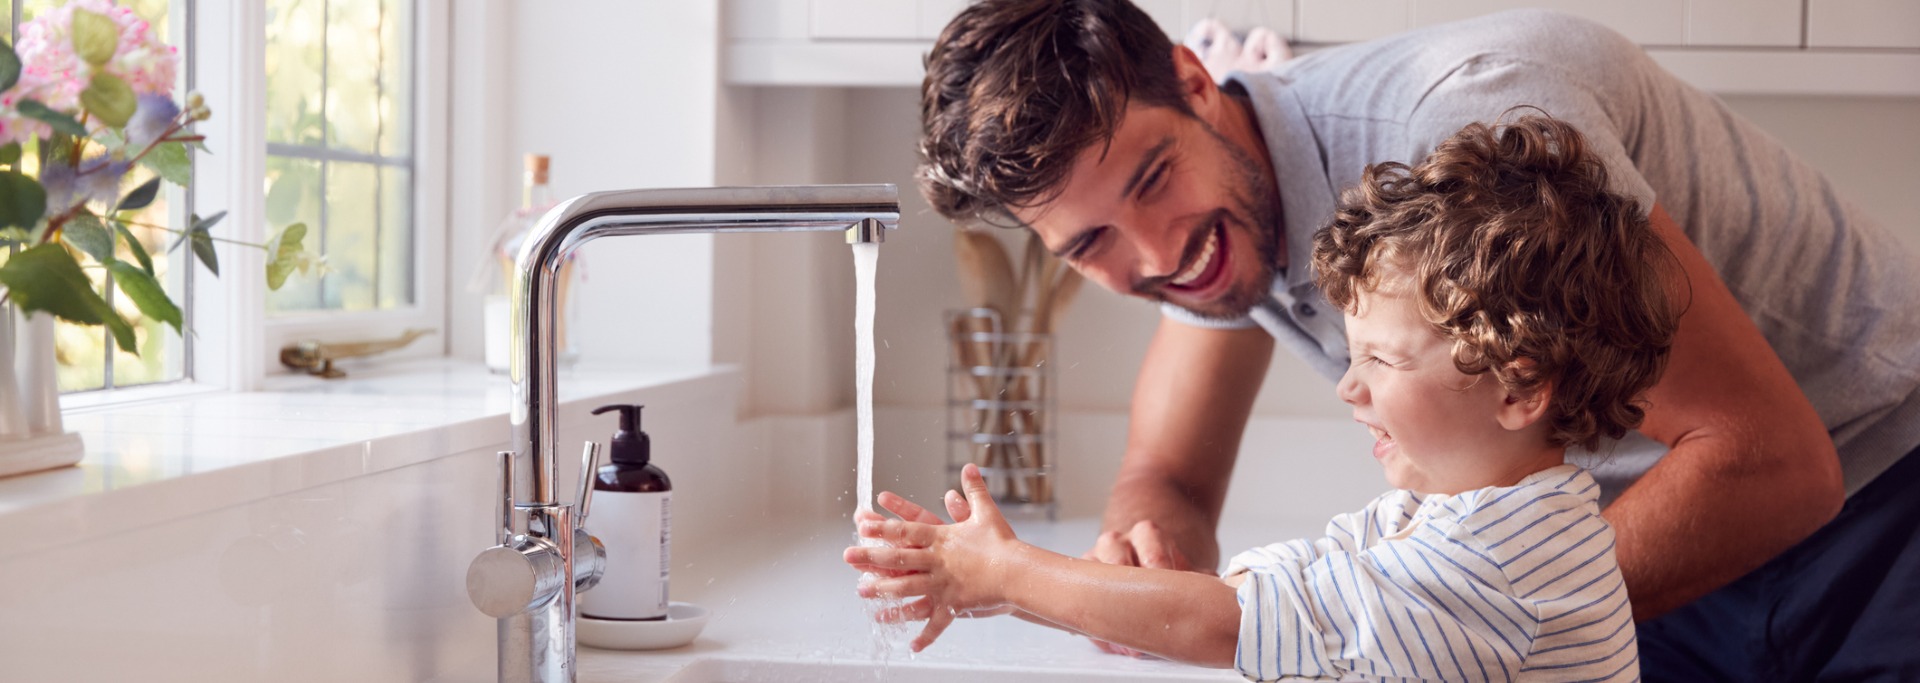 father helping son wash hands